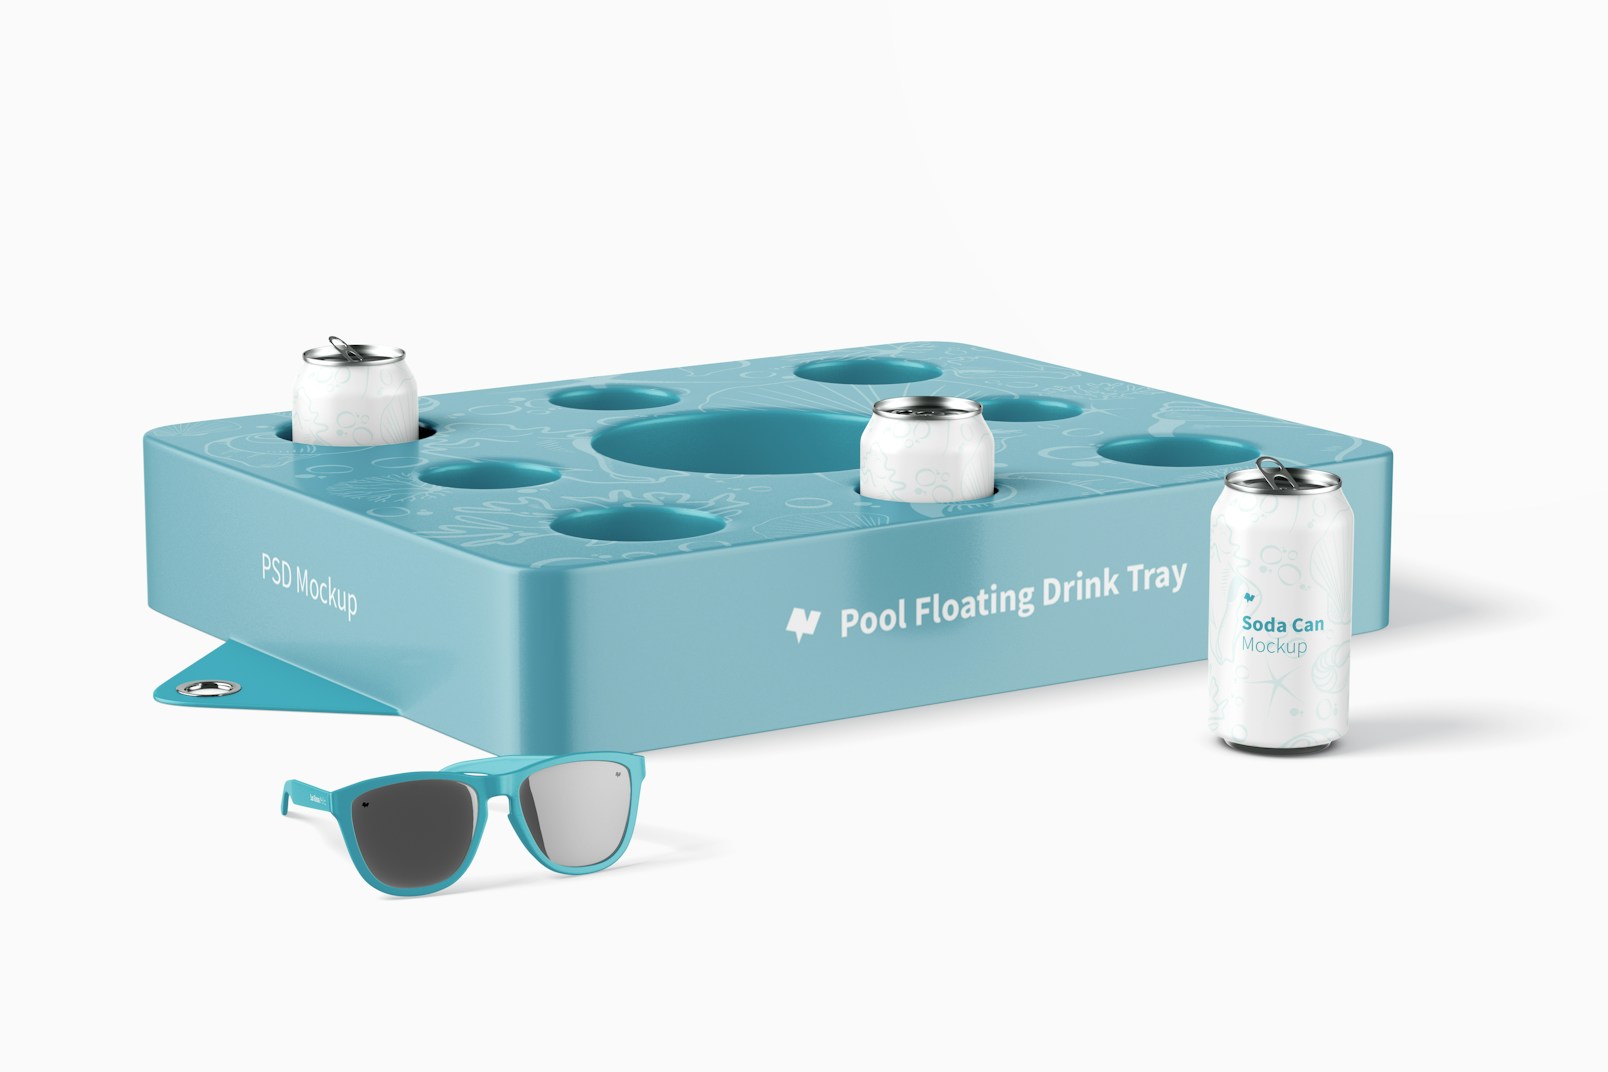 Pool Floating Drink Tray Mockup, Perspective